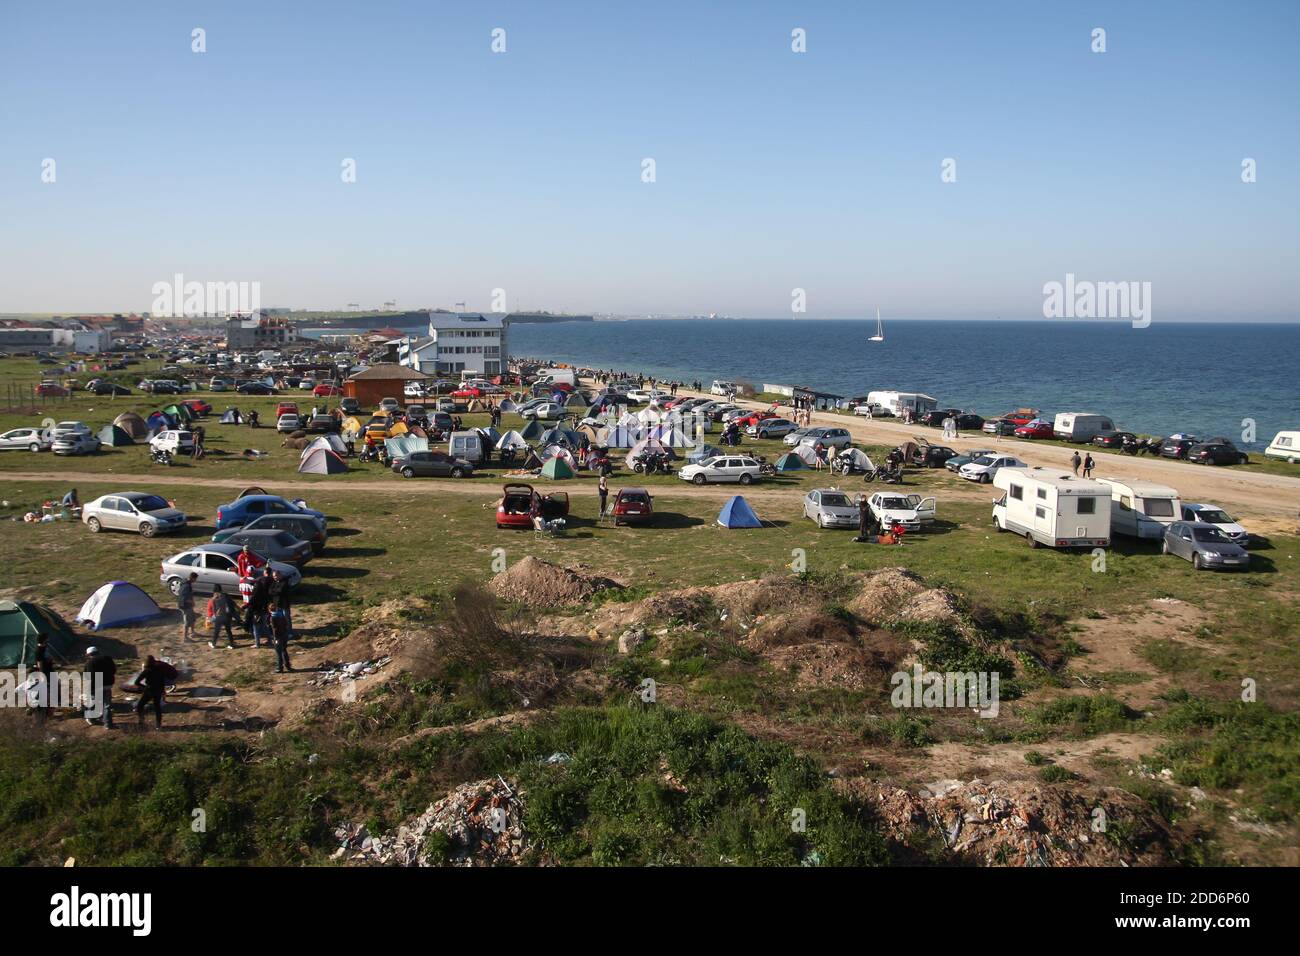 Vama Veche, Romania - May 1, 2010: Overview of the Vama Veche village with tents and people partying during the 1 May holiday. Stock Photo